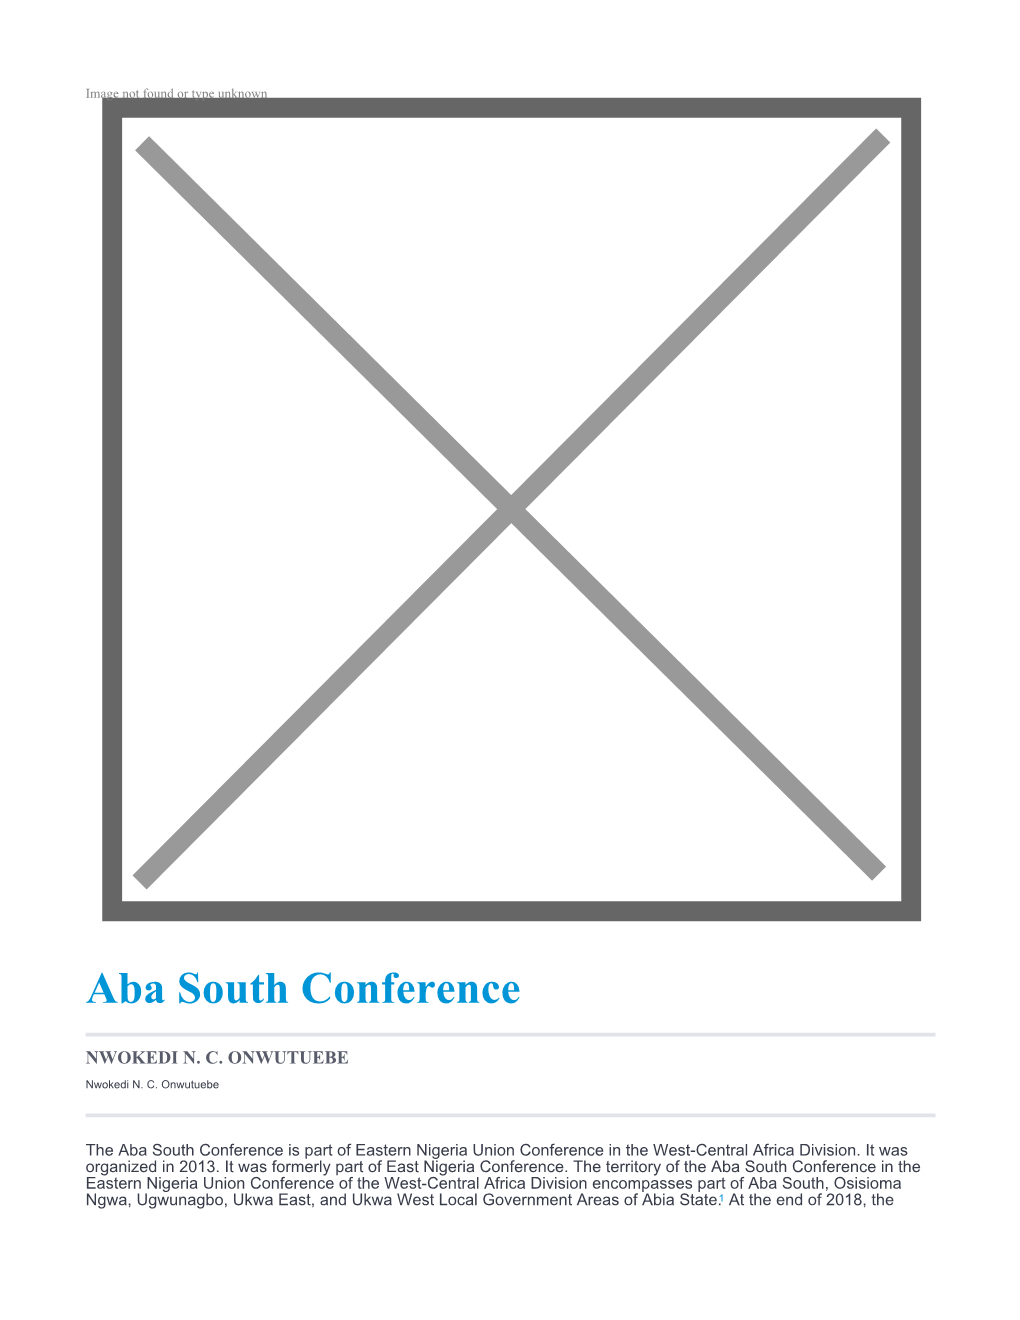 Aba South Conference